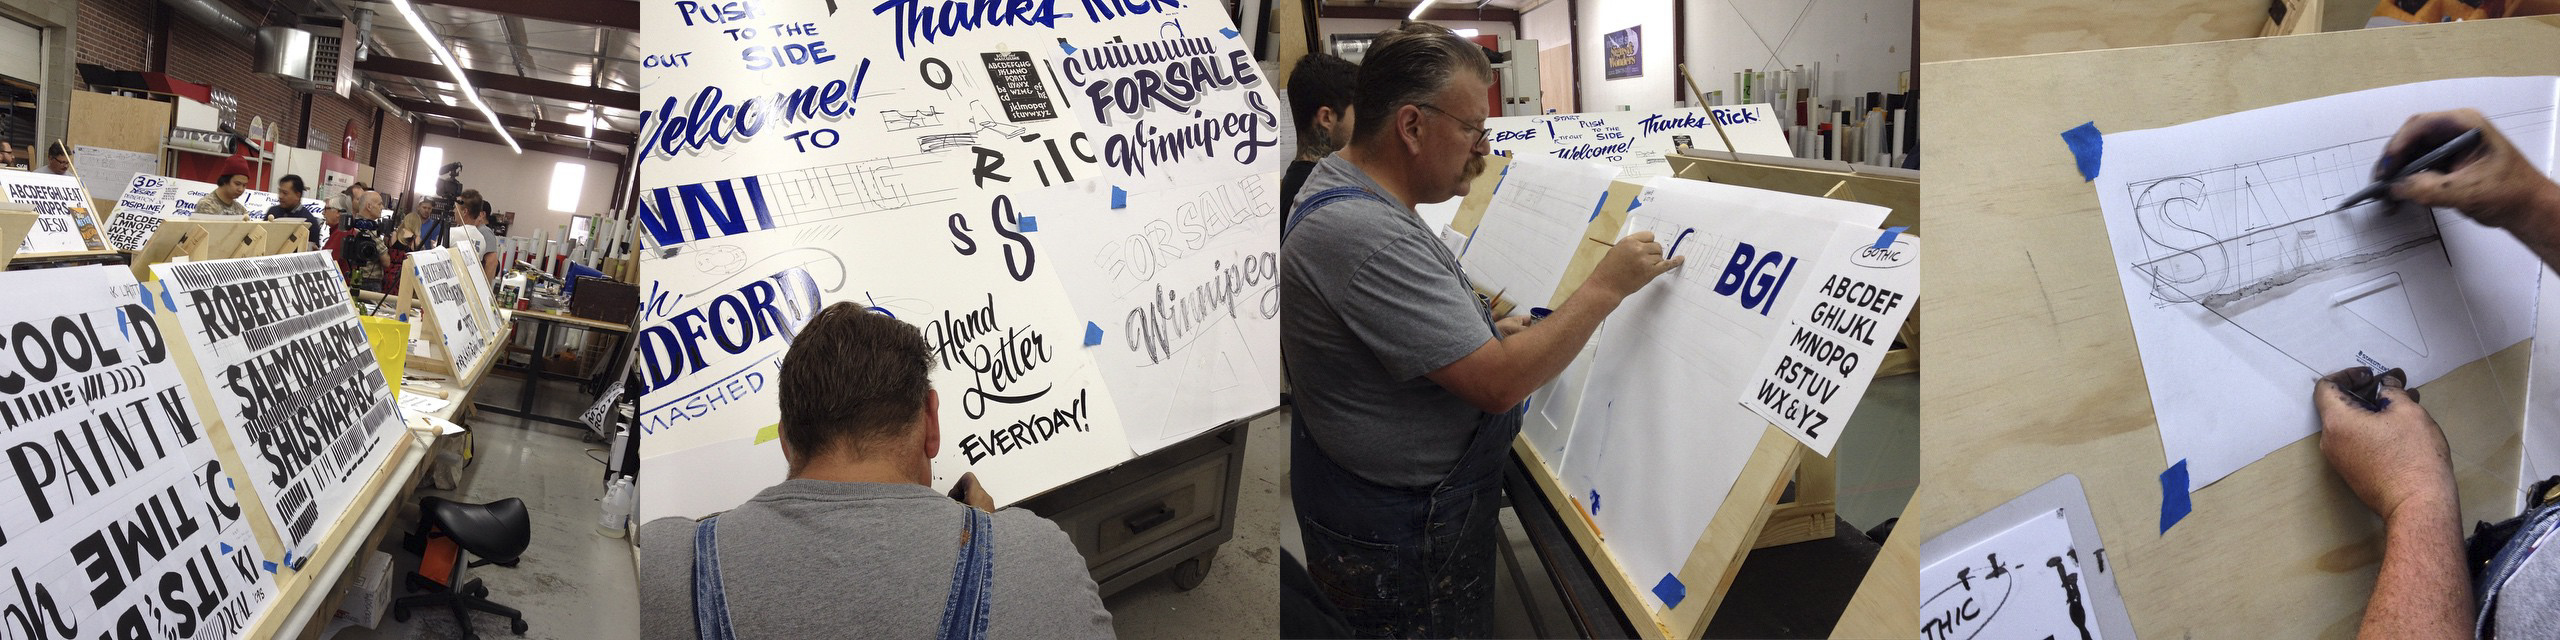 photos of Rick's hand lettering classes.